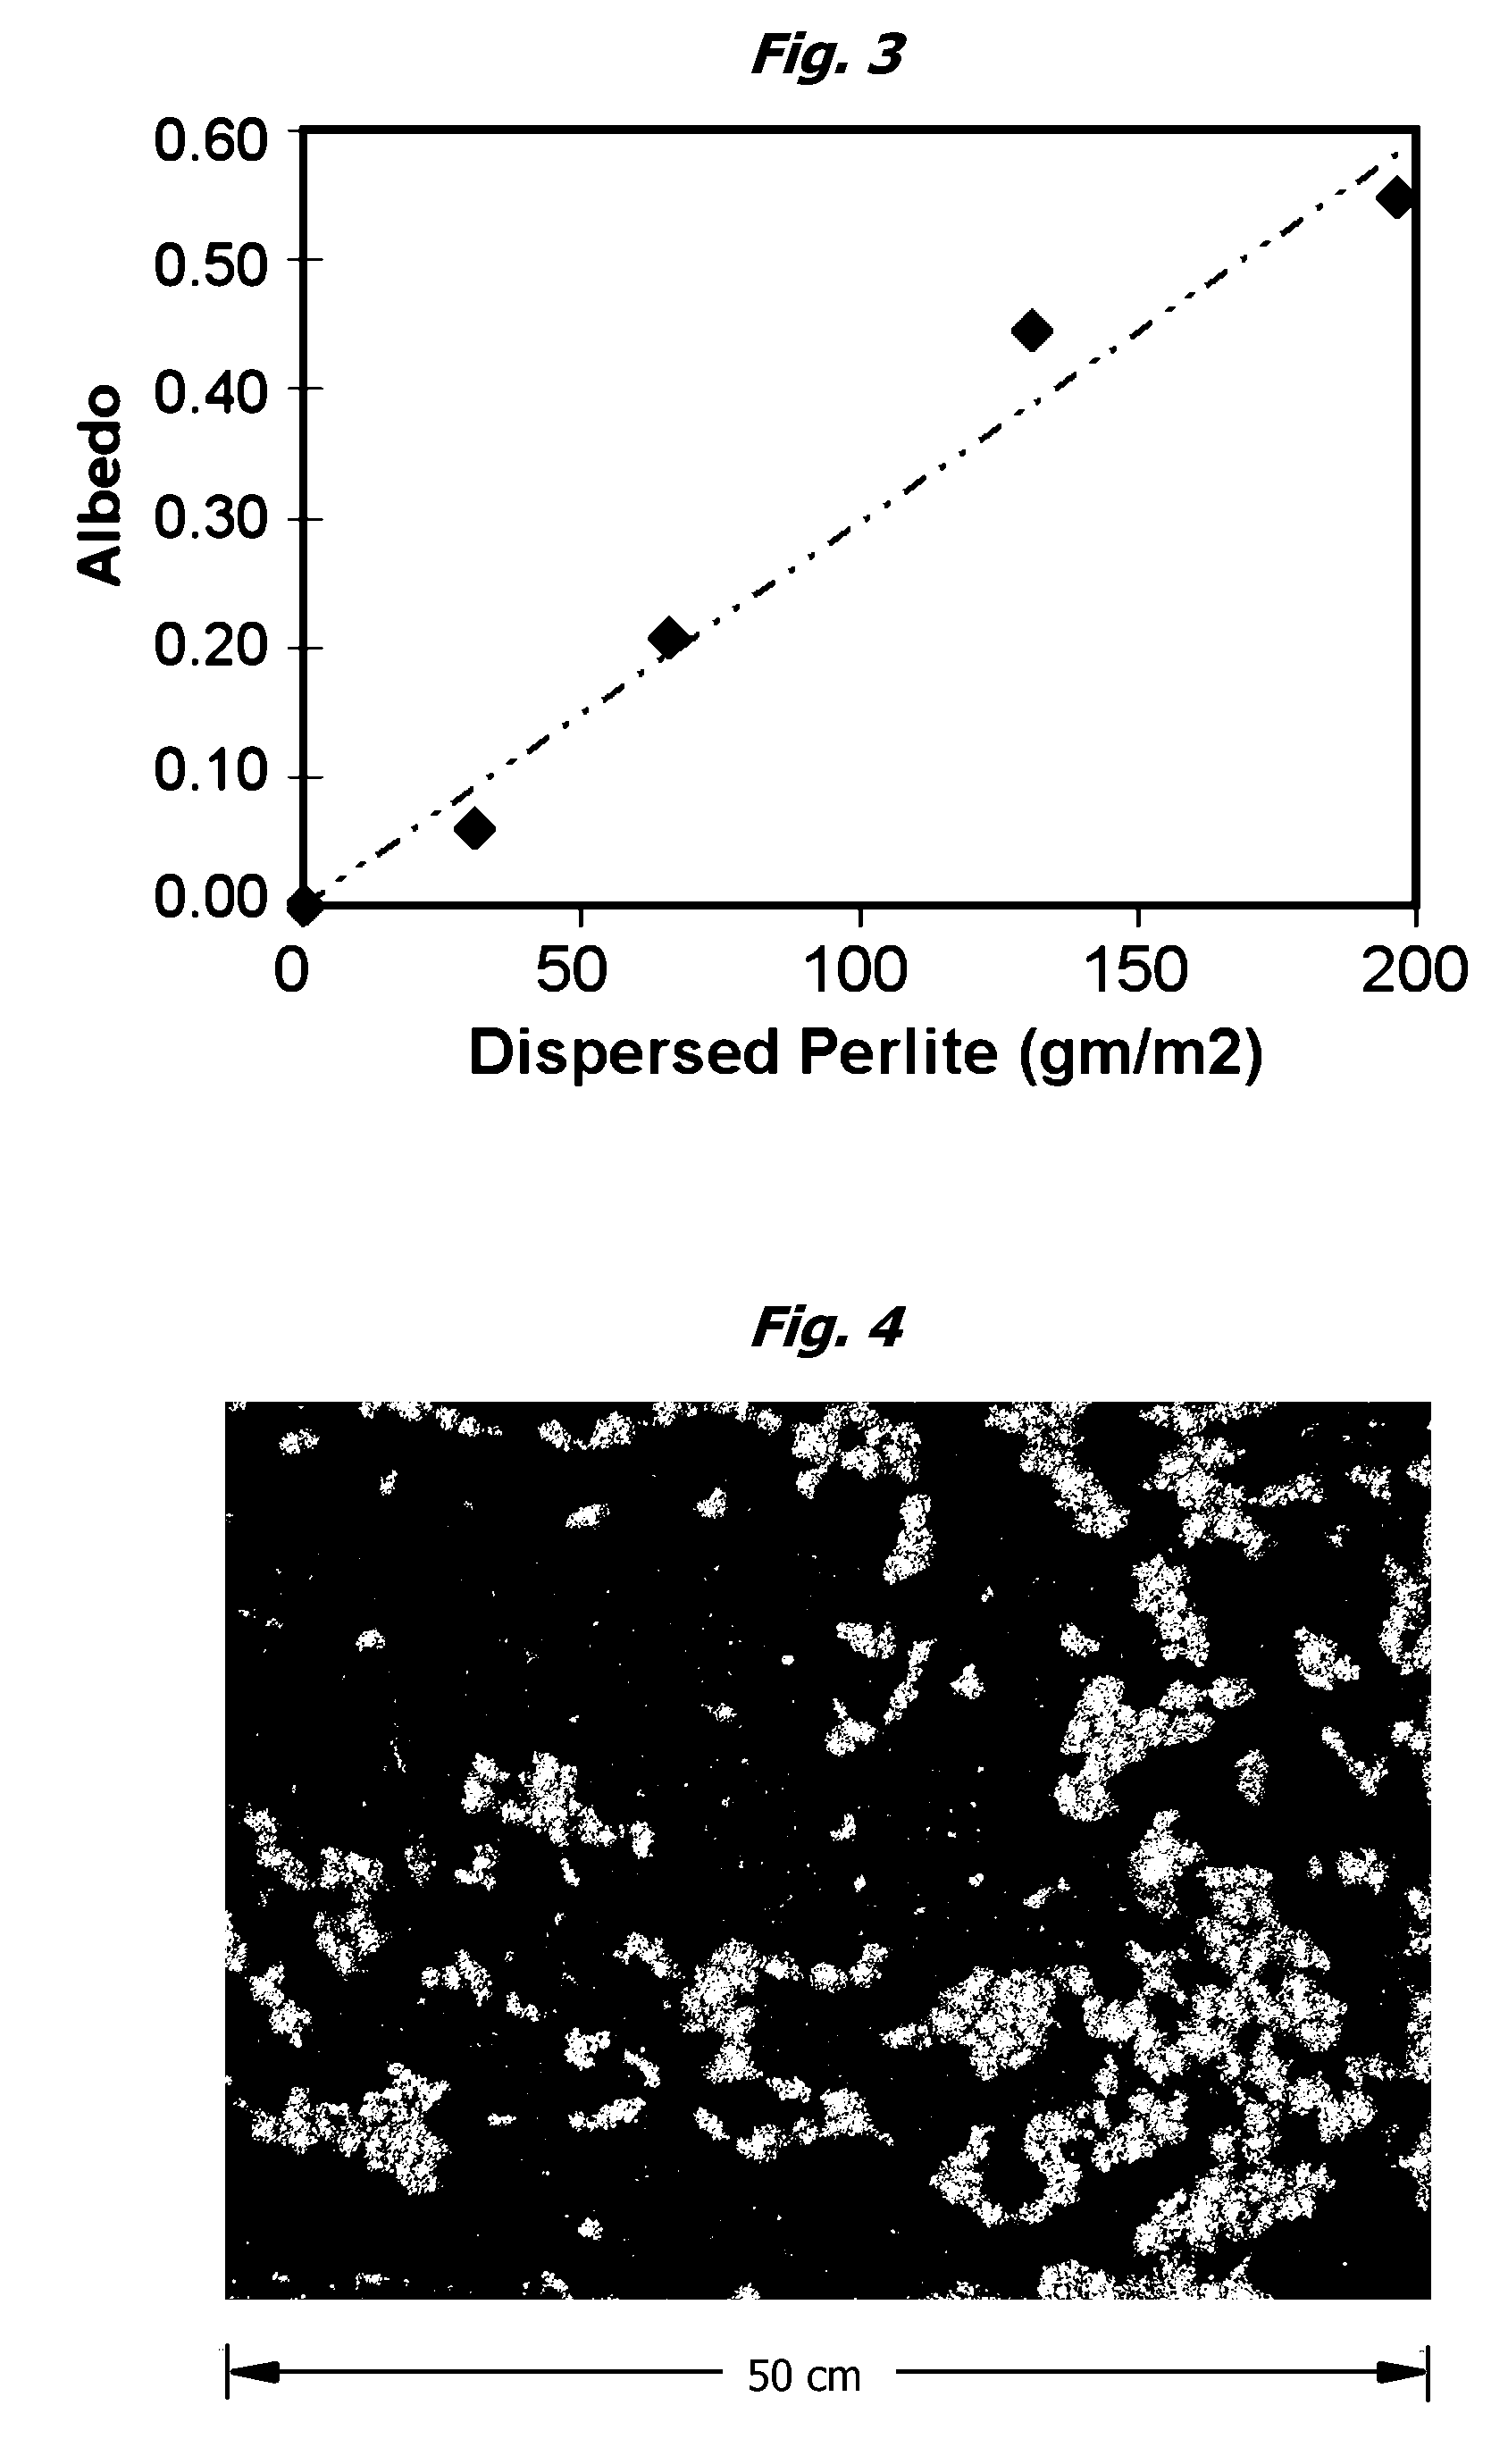 Biophysical geoengineering compositions and methods